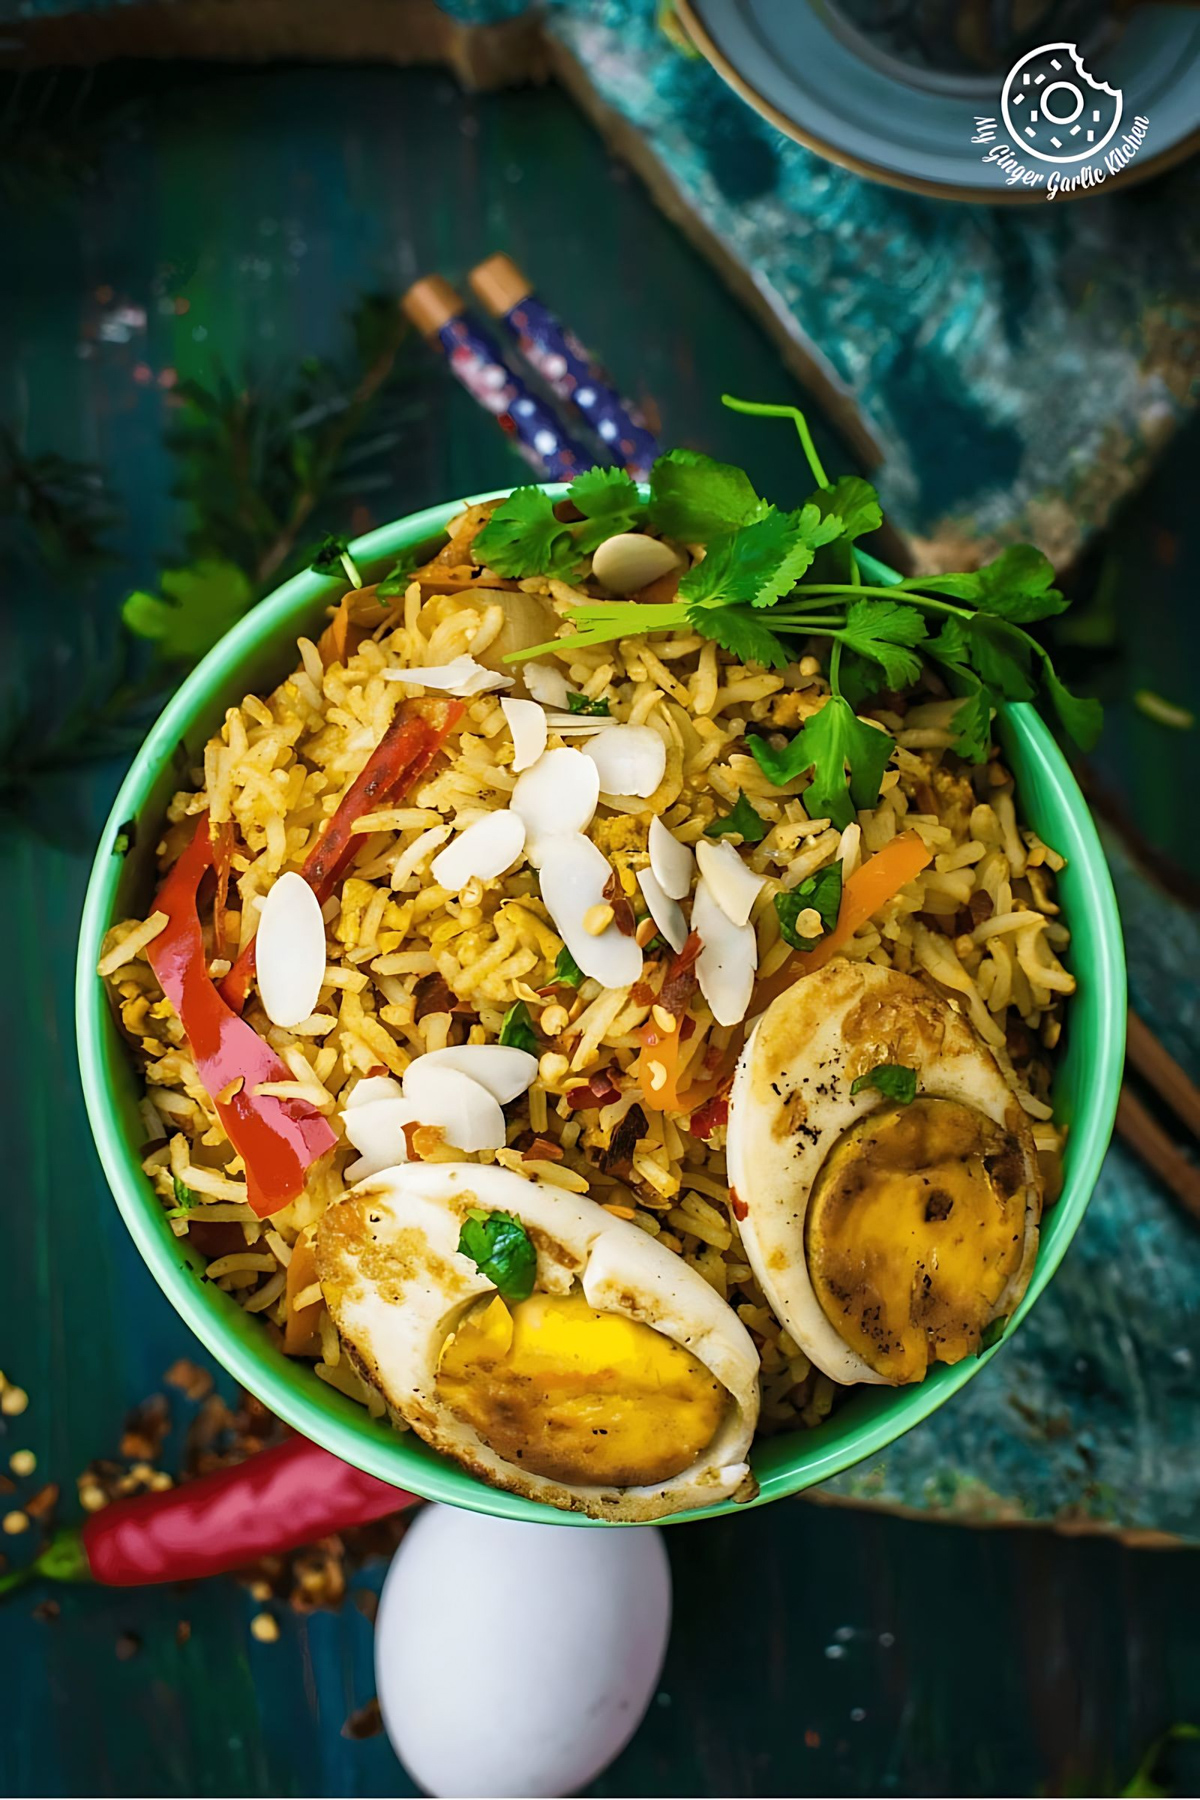 Image of Indian Style Triple Egg Fried Rice Recipe